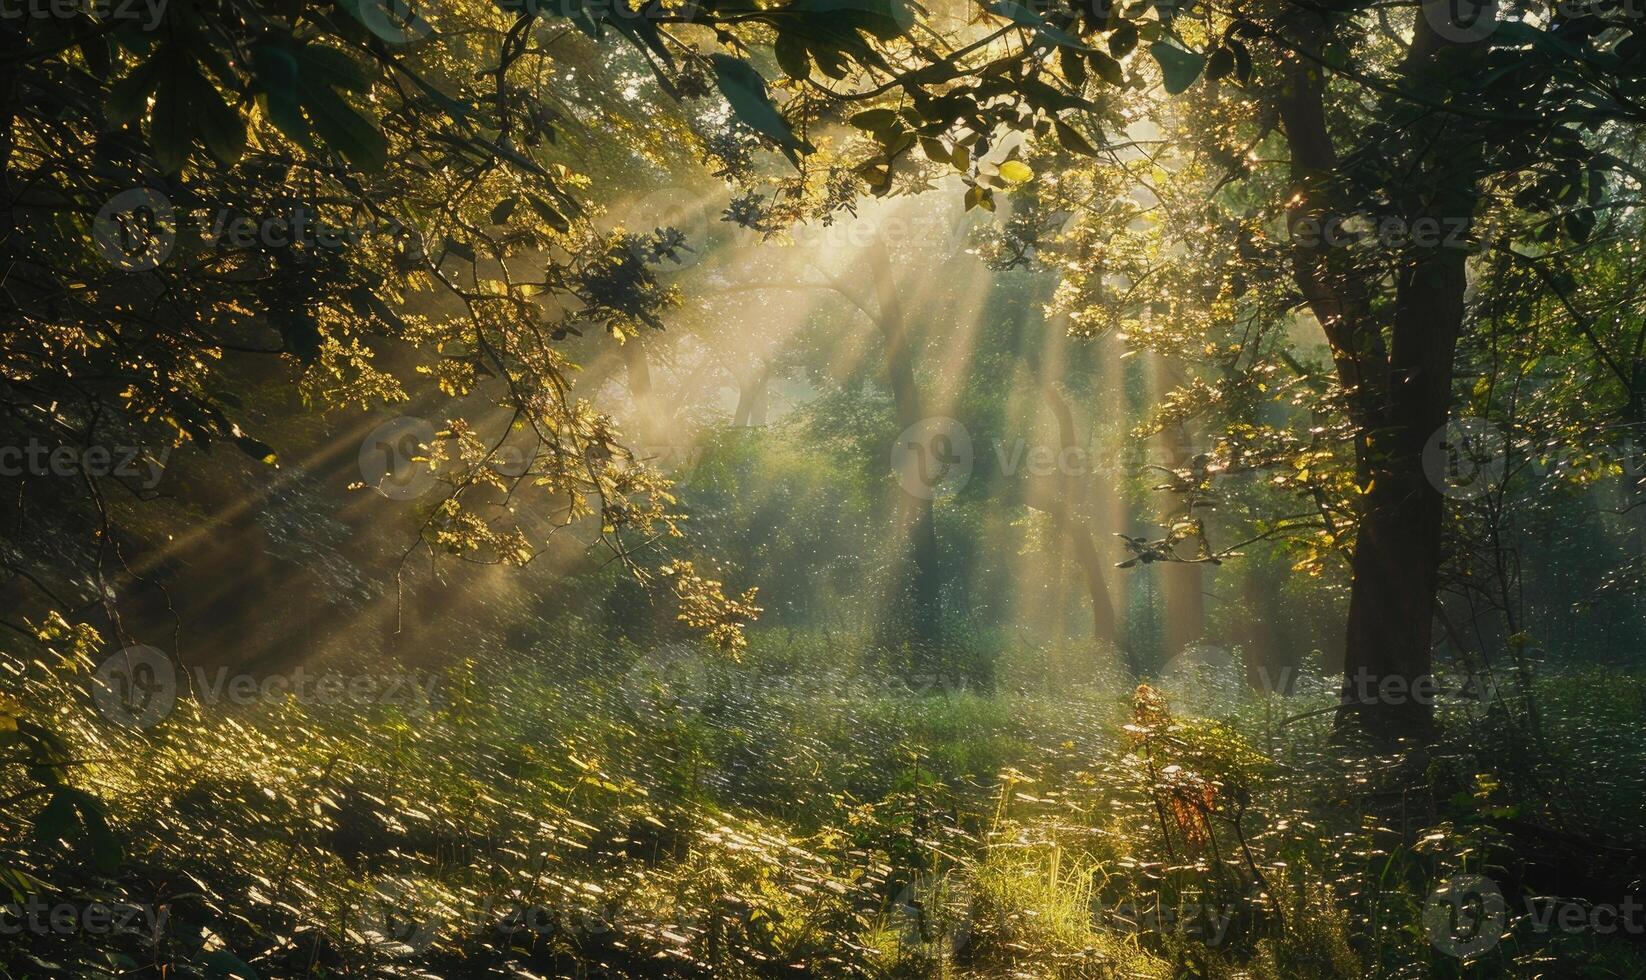 A peaceful woodland scene with sunlight filtering through the trees photo